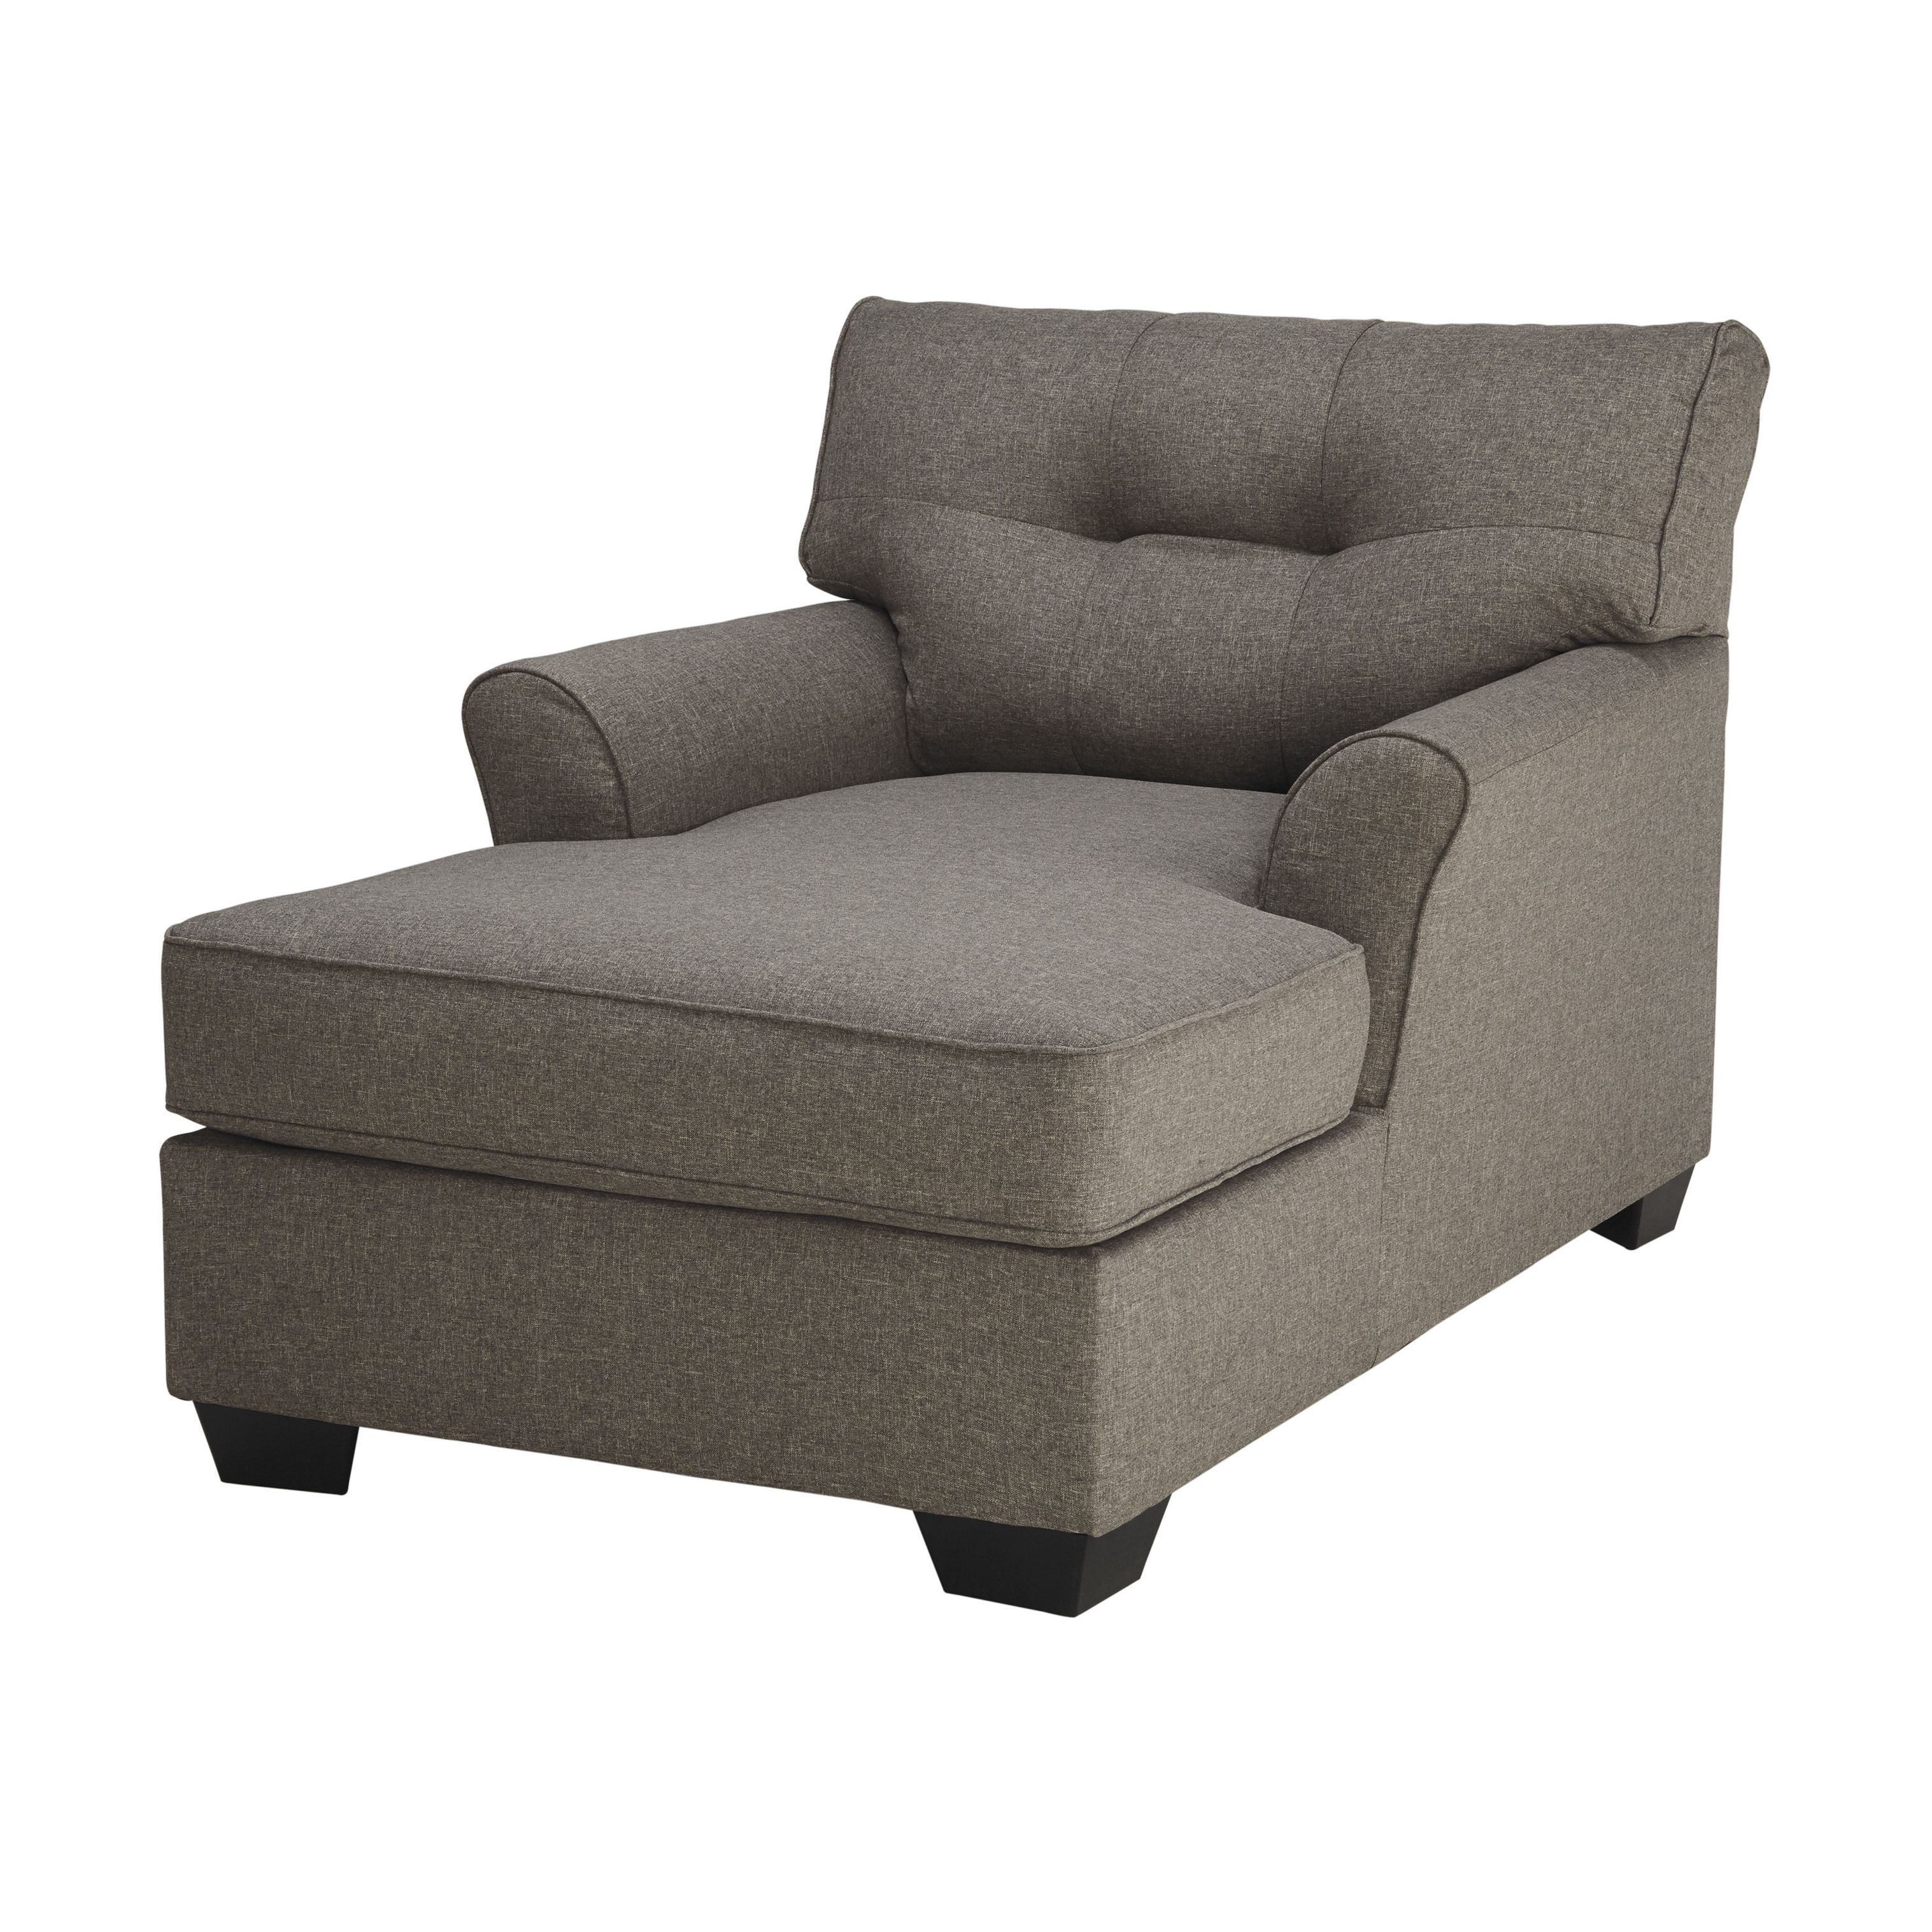 Ashley Furniture Chaise Lounge (View 7 of 15)